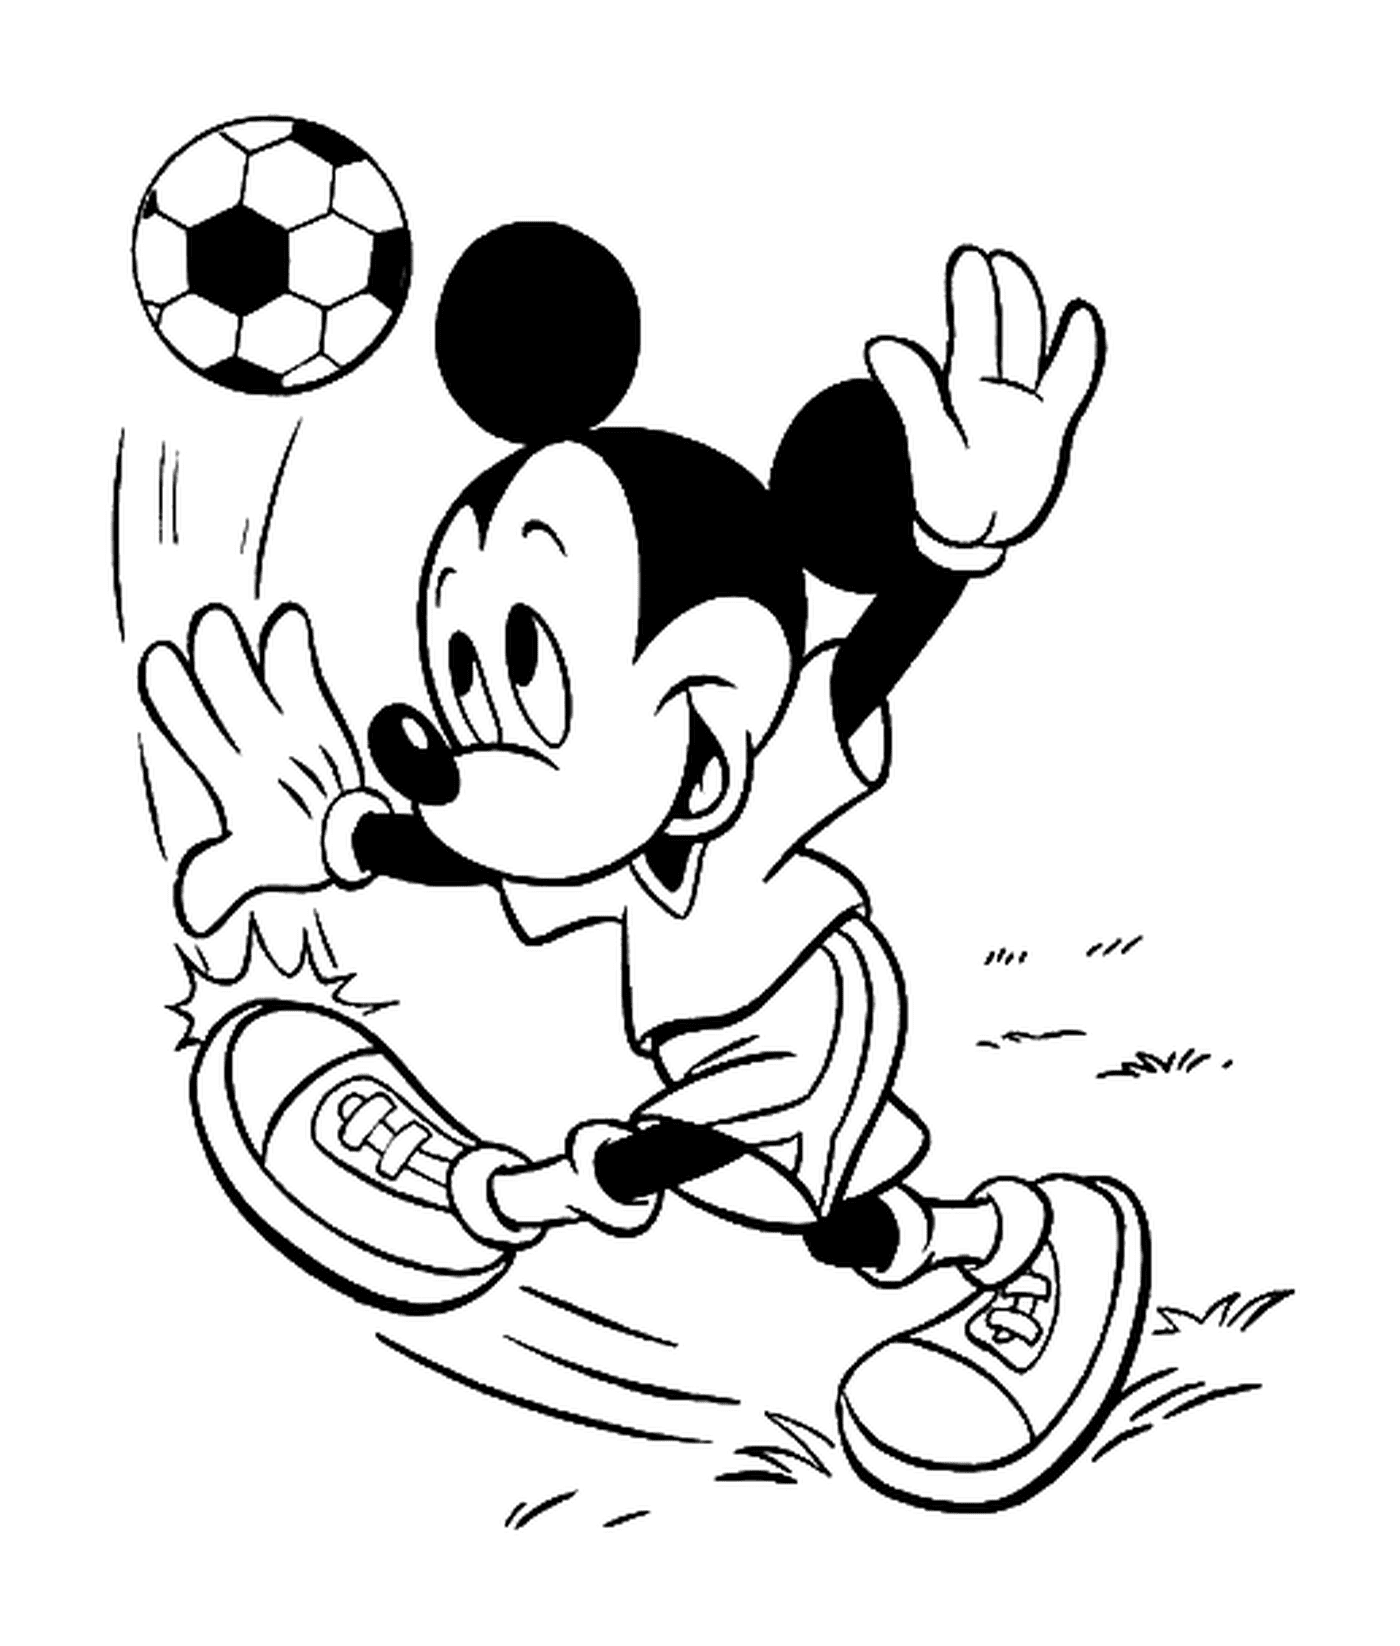  Mickey plays football with a soccer ball 